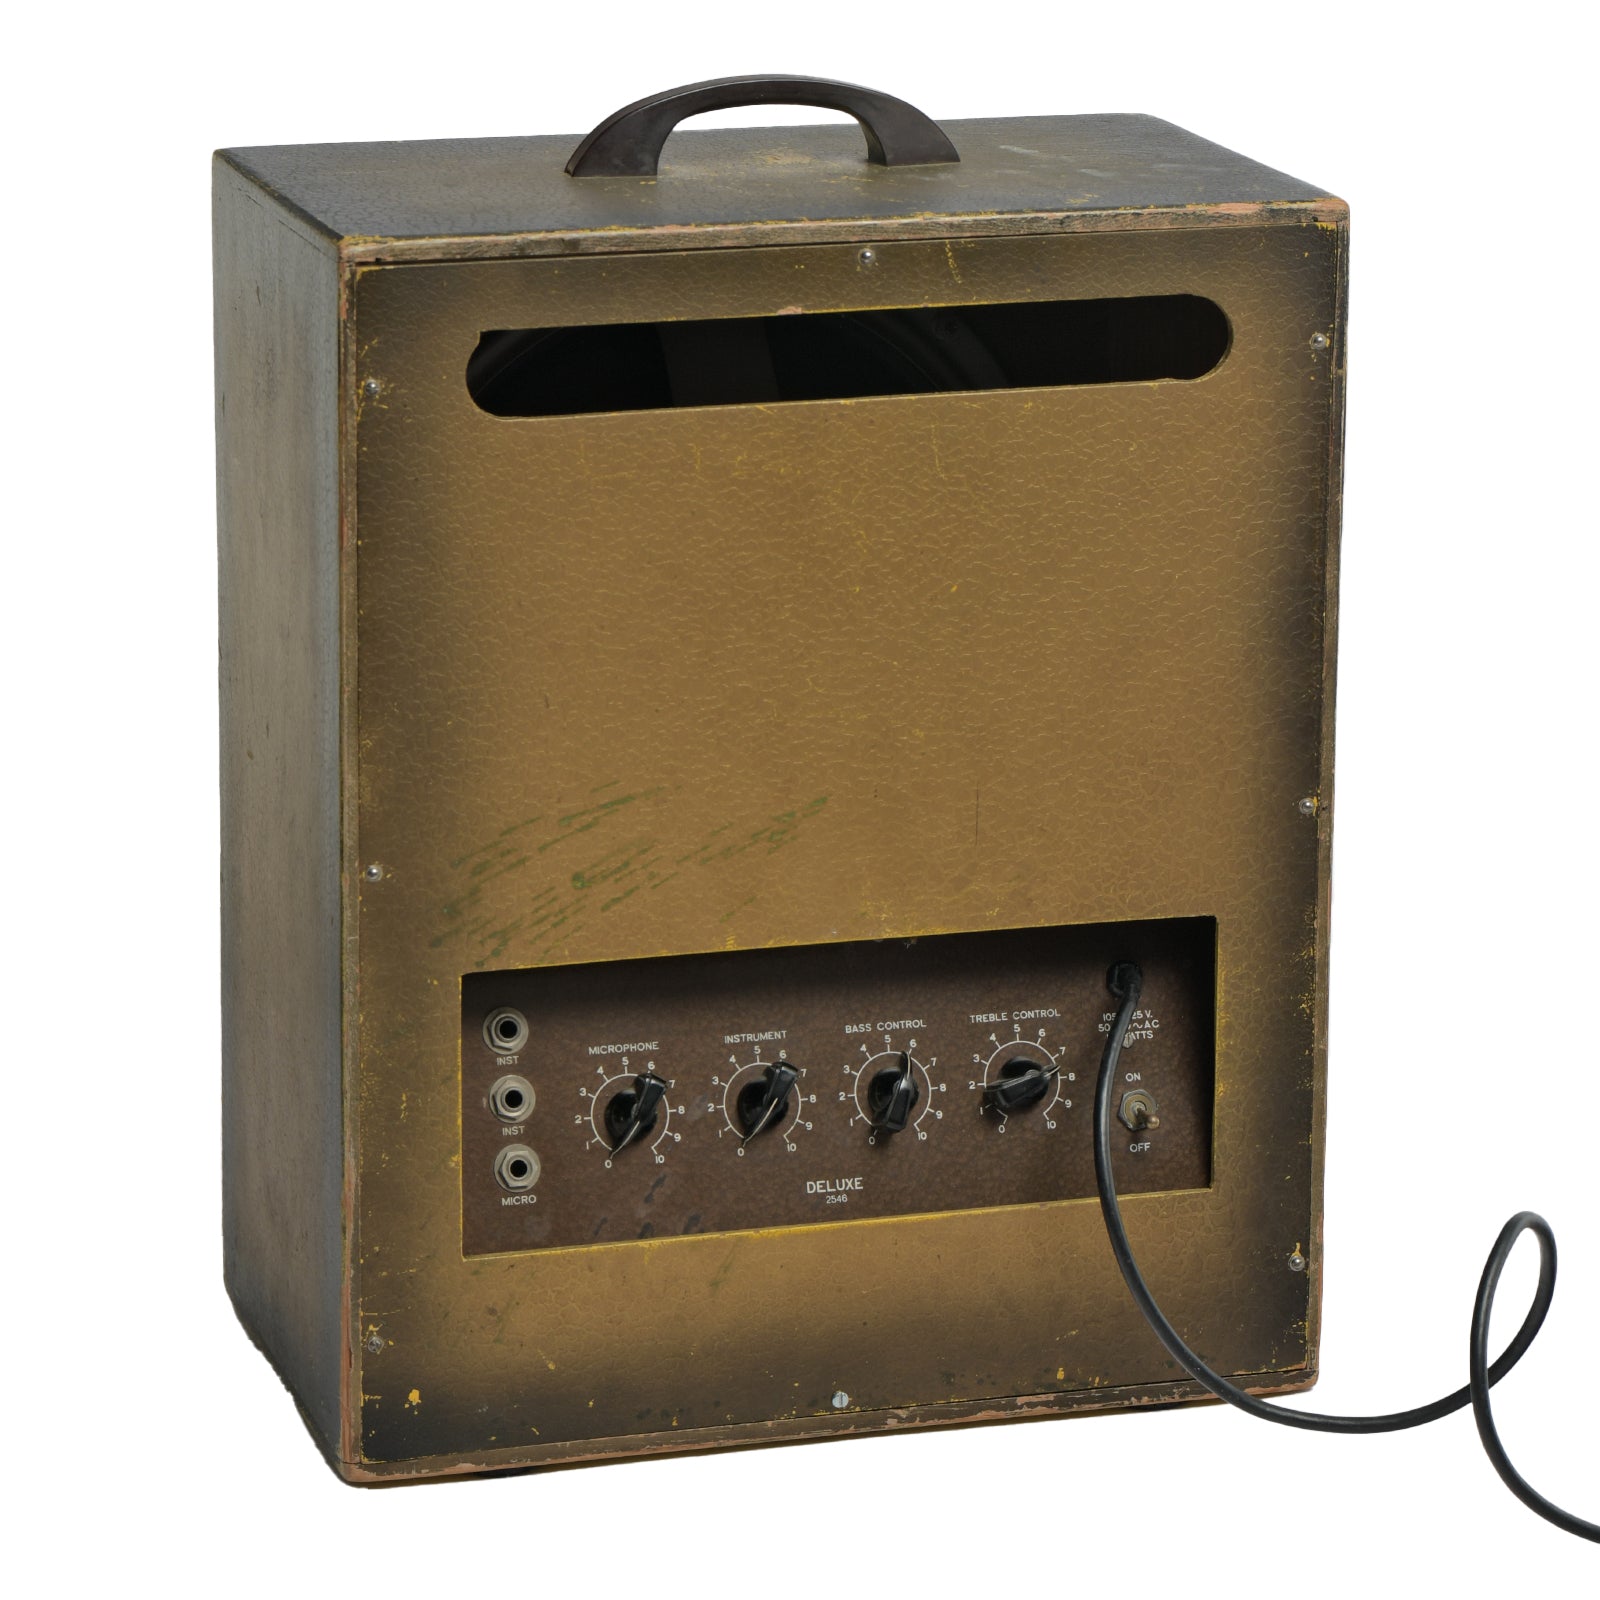 Back and side of of Montgomery amplifier